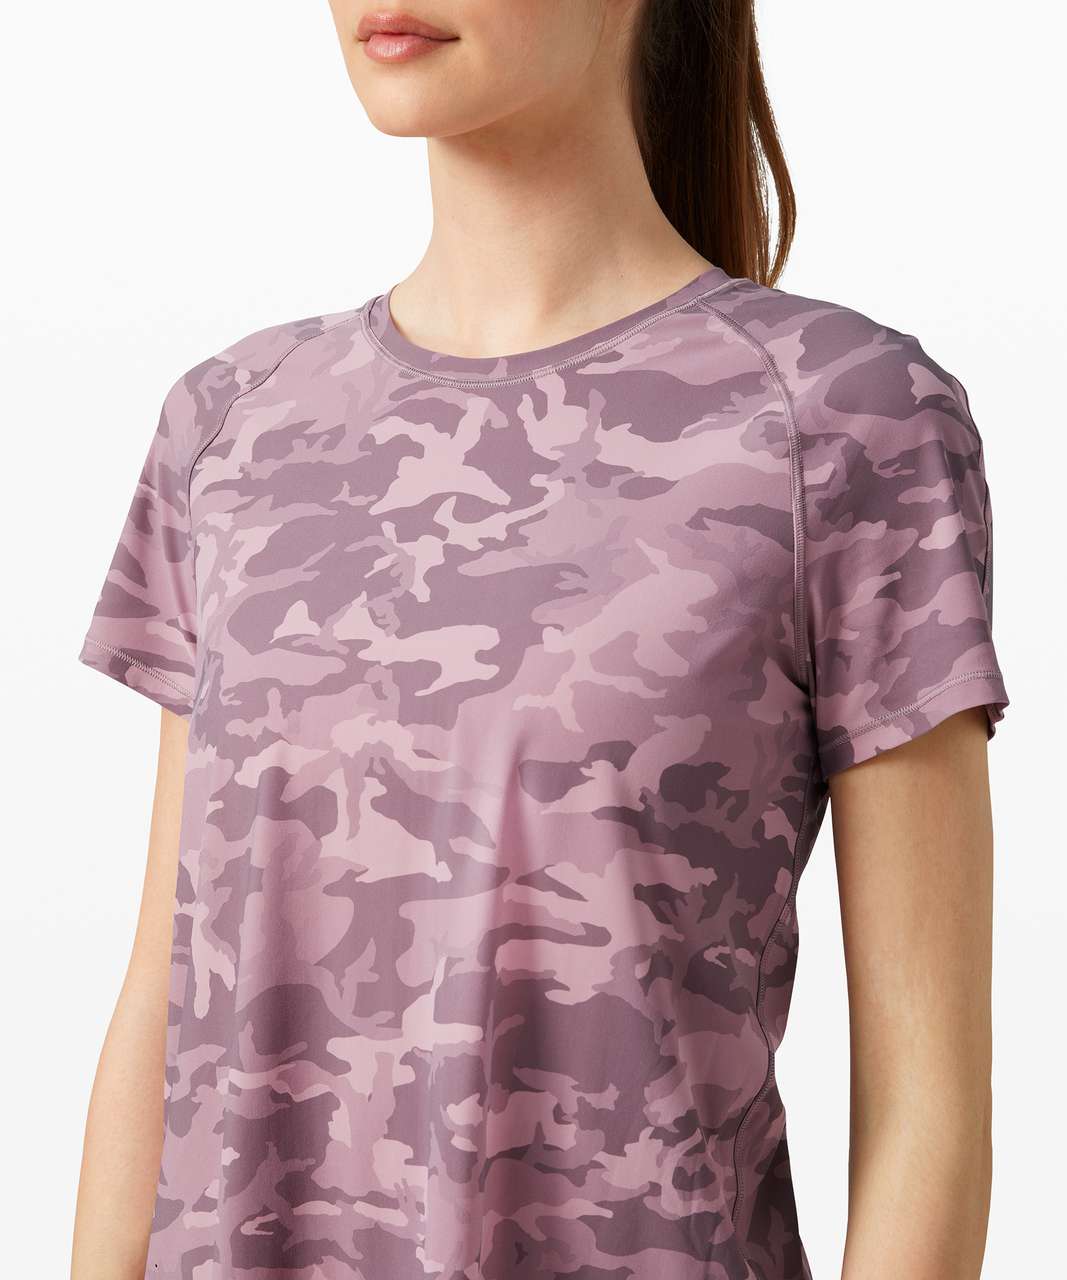 Lululemon Quick Pace Short Sleeve - Incognito Camo Pink Taupe Multi